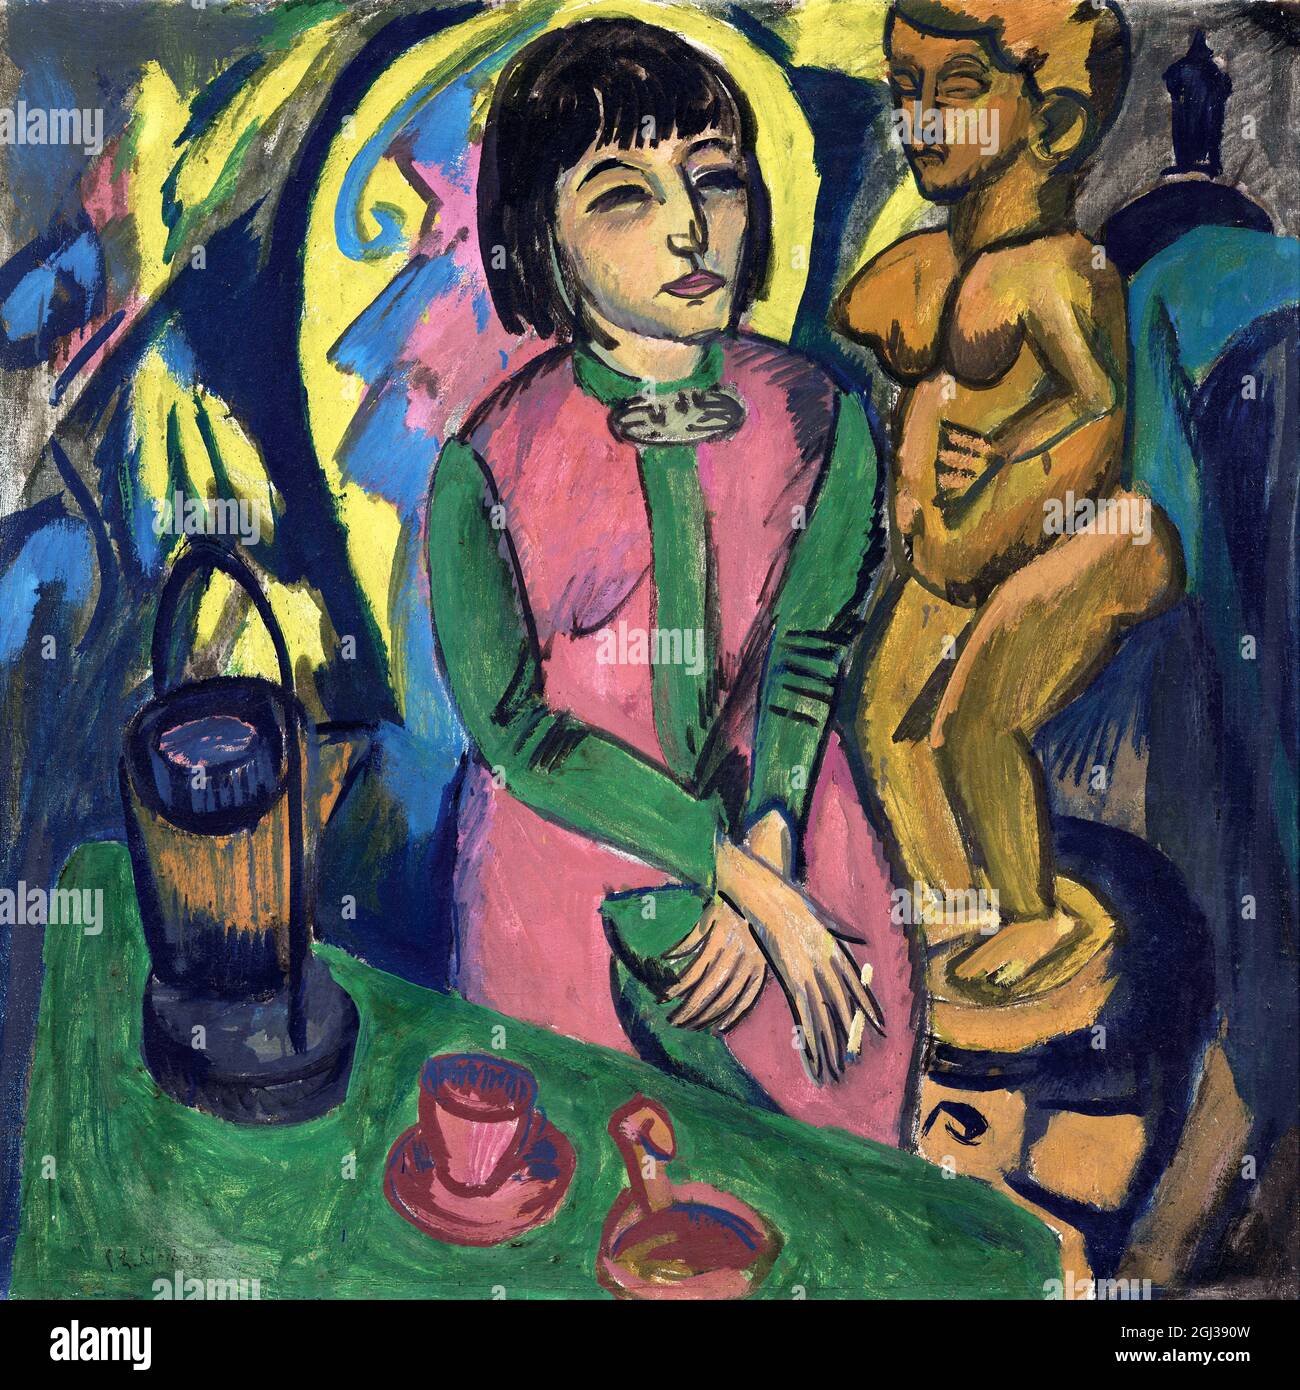 Seated Woman with Wood Sculpture by Ernst Ludwig Kirchner (1880-1938), oil on canvas, 1912 Stock Photo